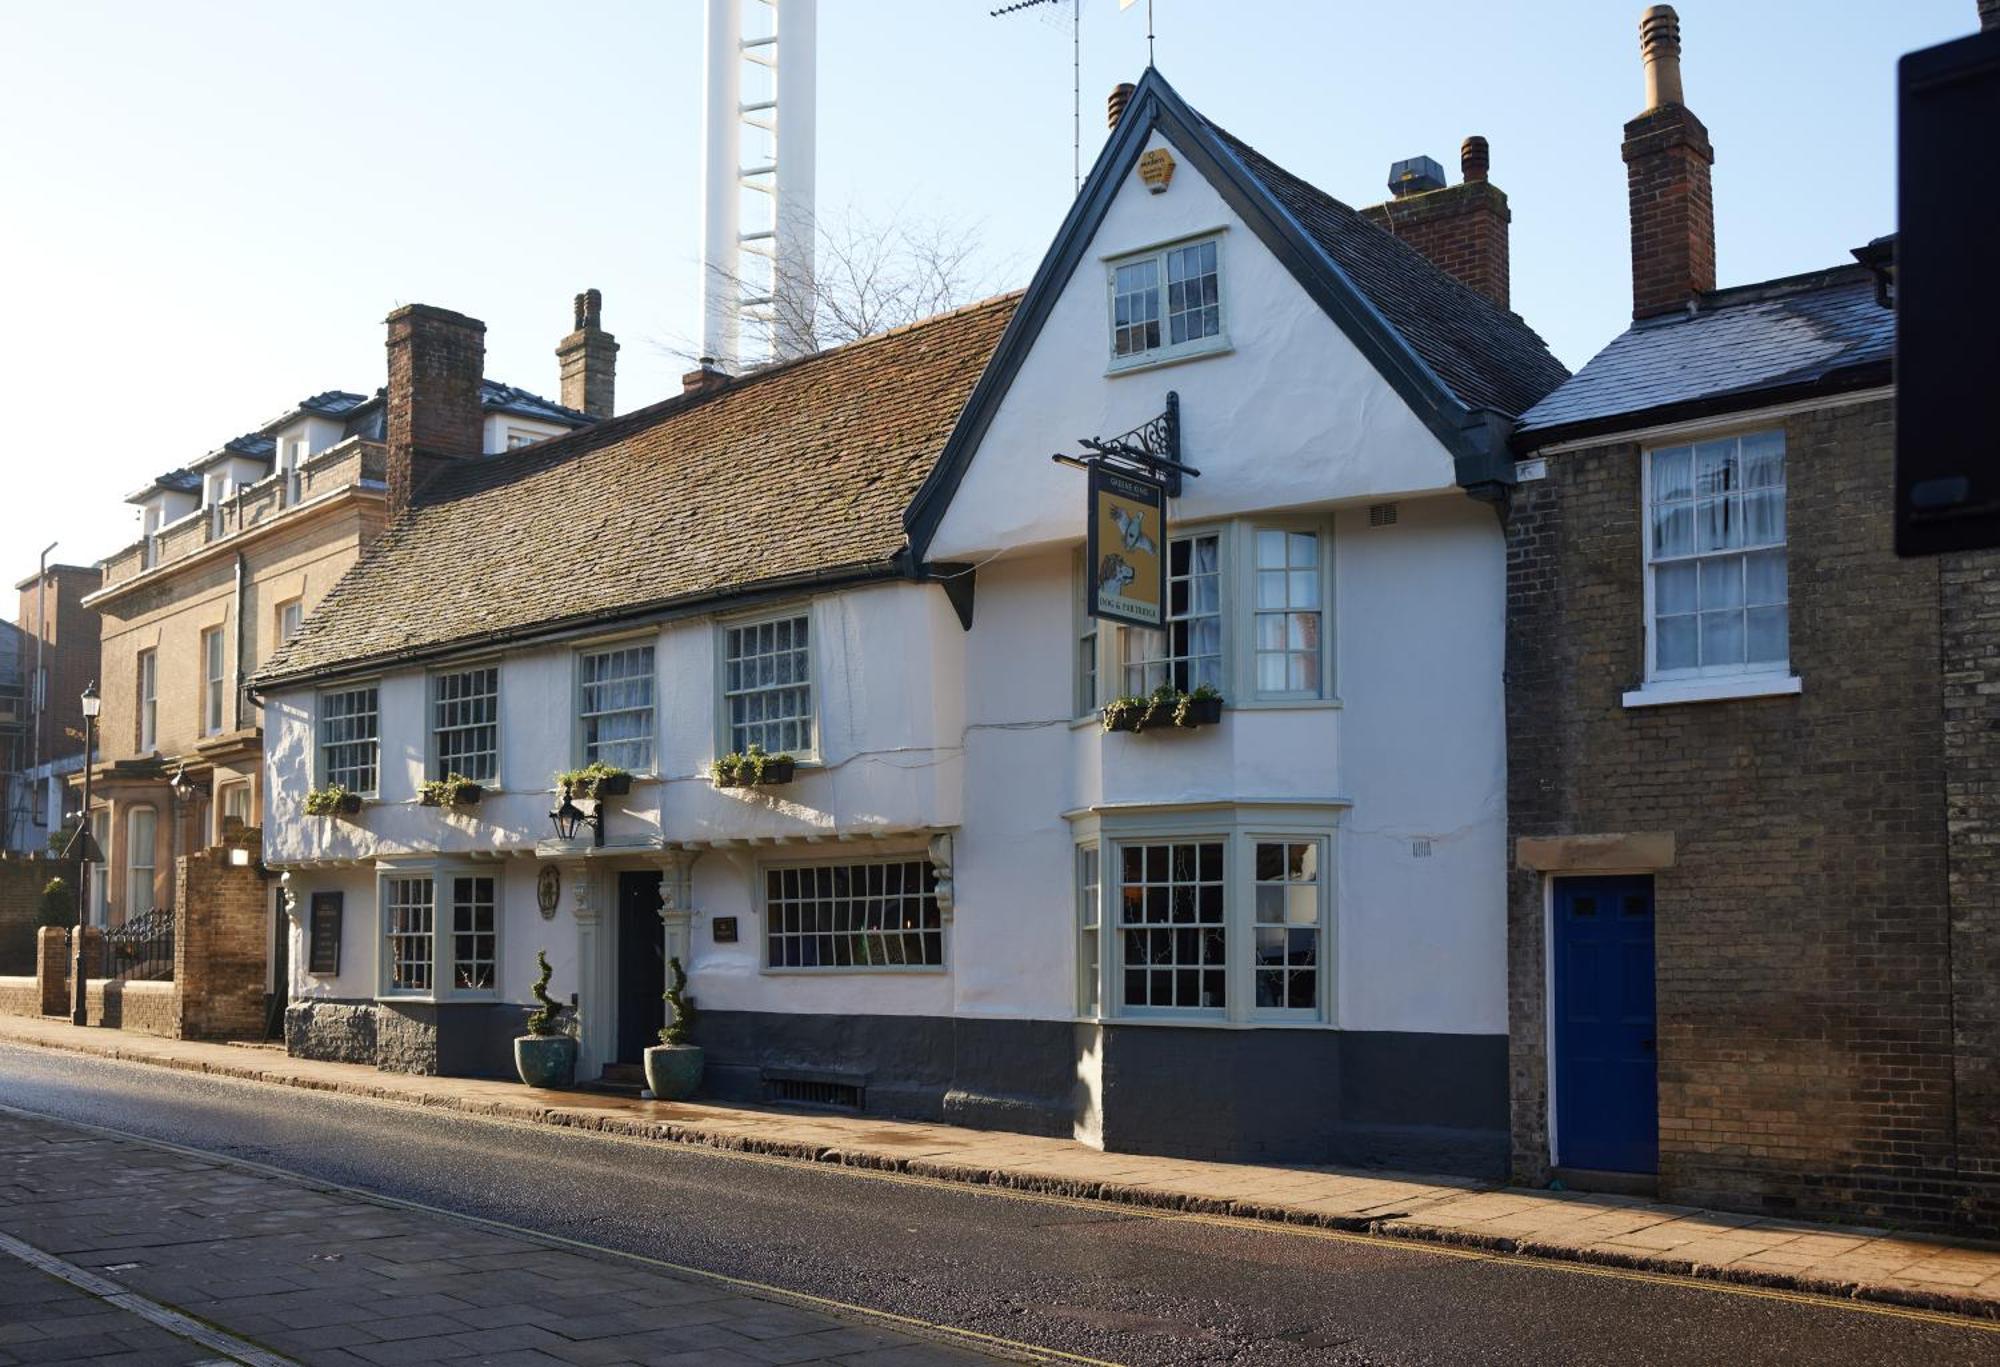 Dog And Partridge By Greene King Inns Bury St. Edmunds Exterior foto